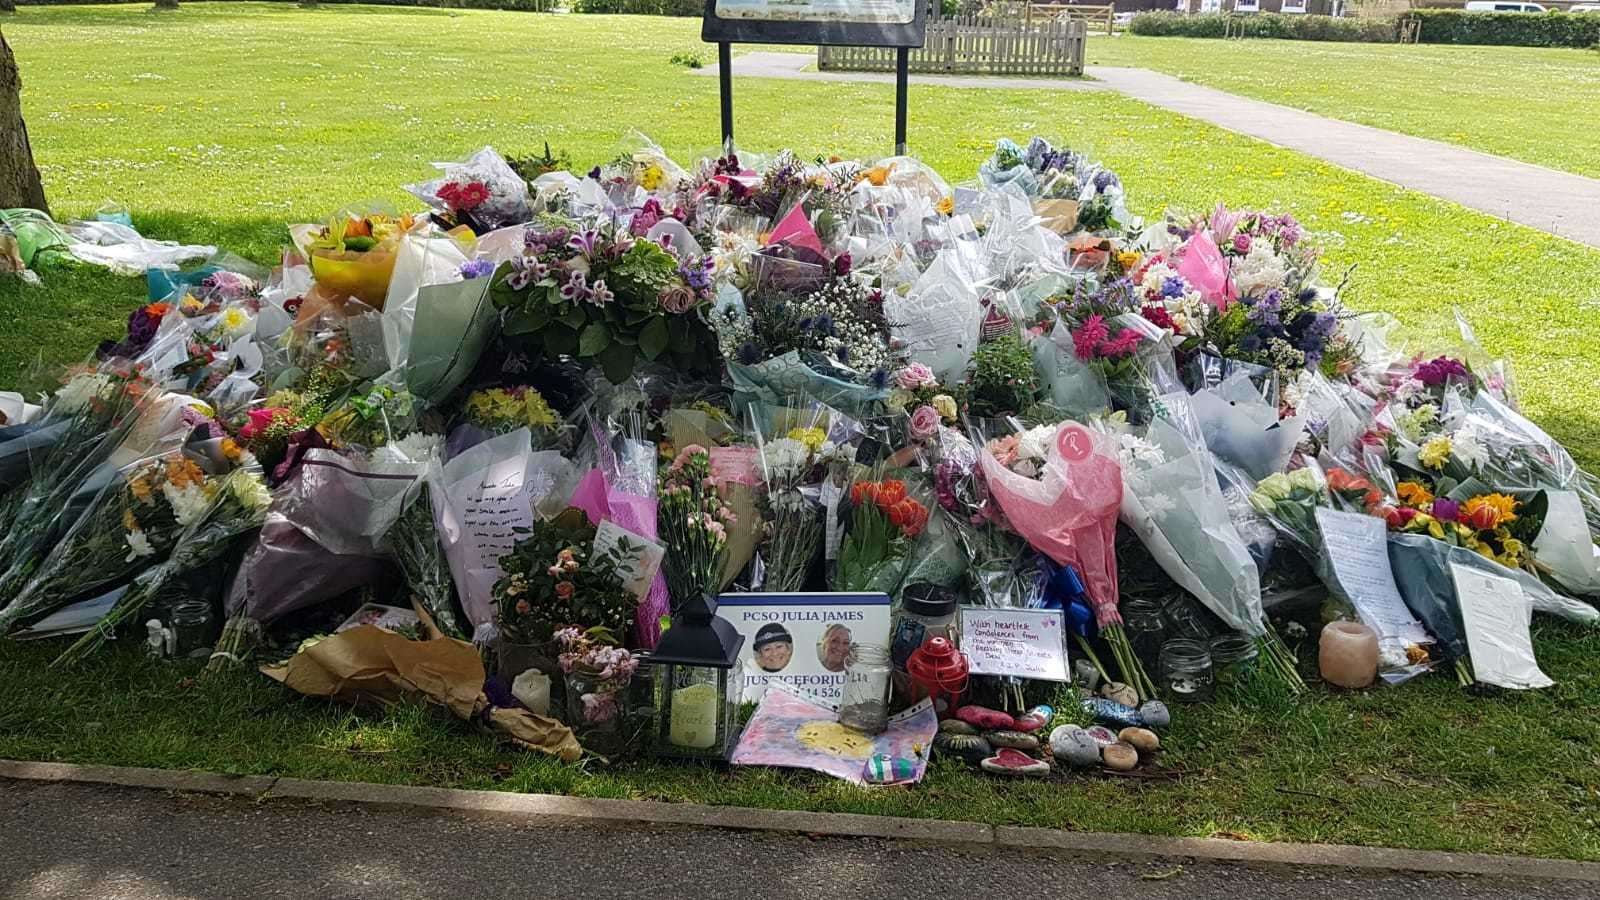 More tributes have been left in Aylesham